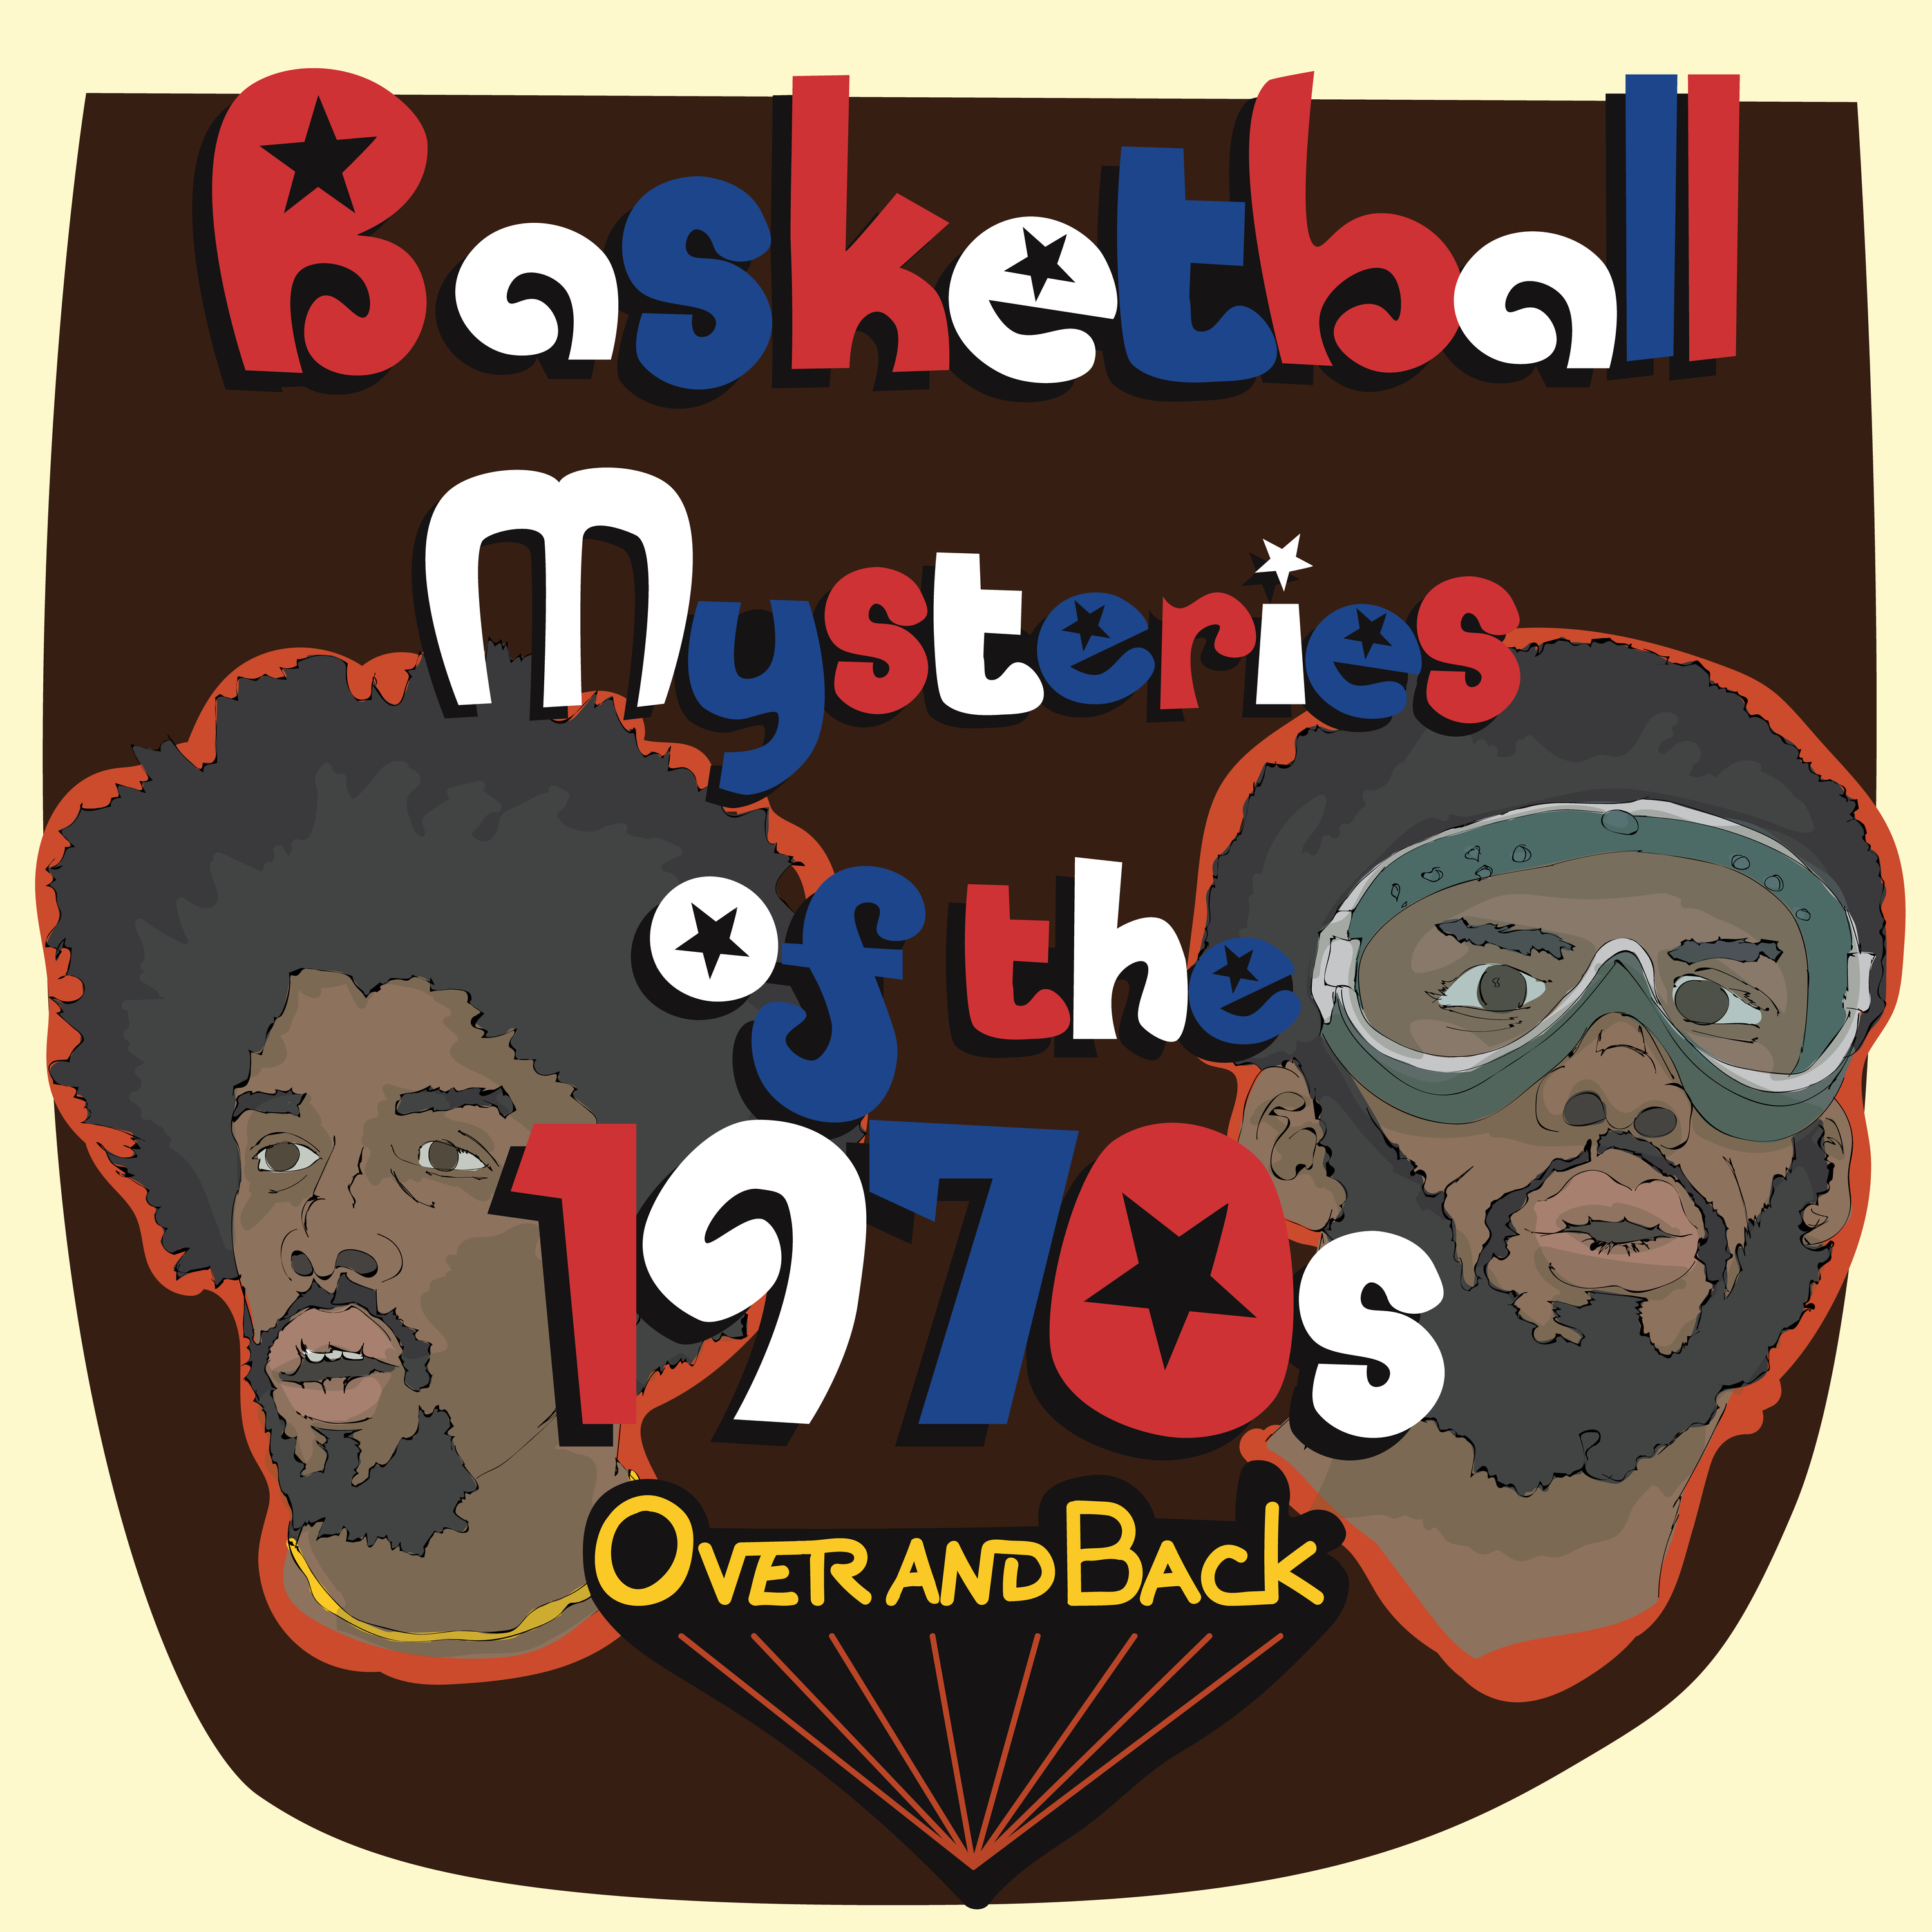 How many teams were added, subtracted, moved, or changed? (Basketball Mysteries of the 1970s #10)